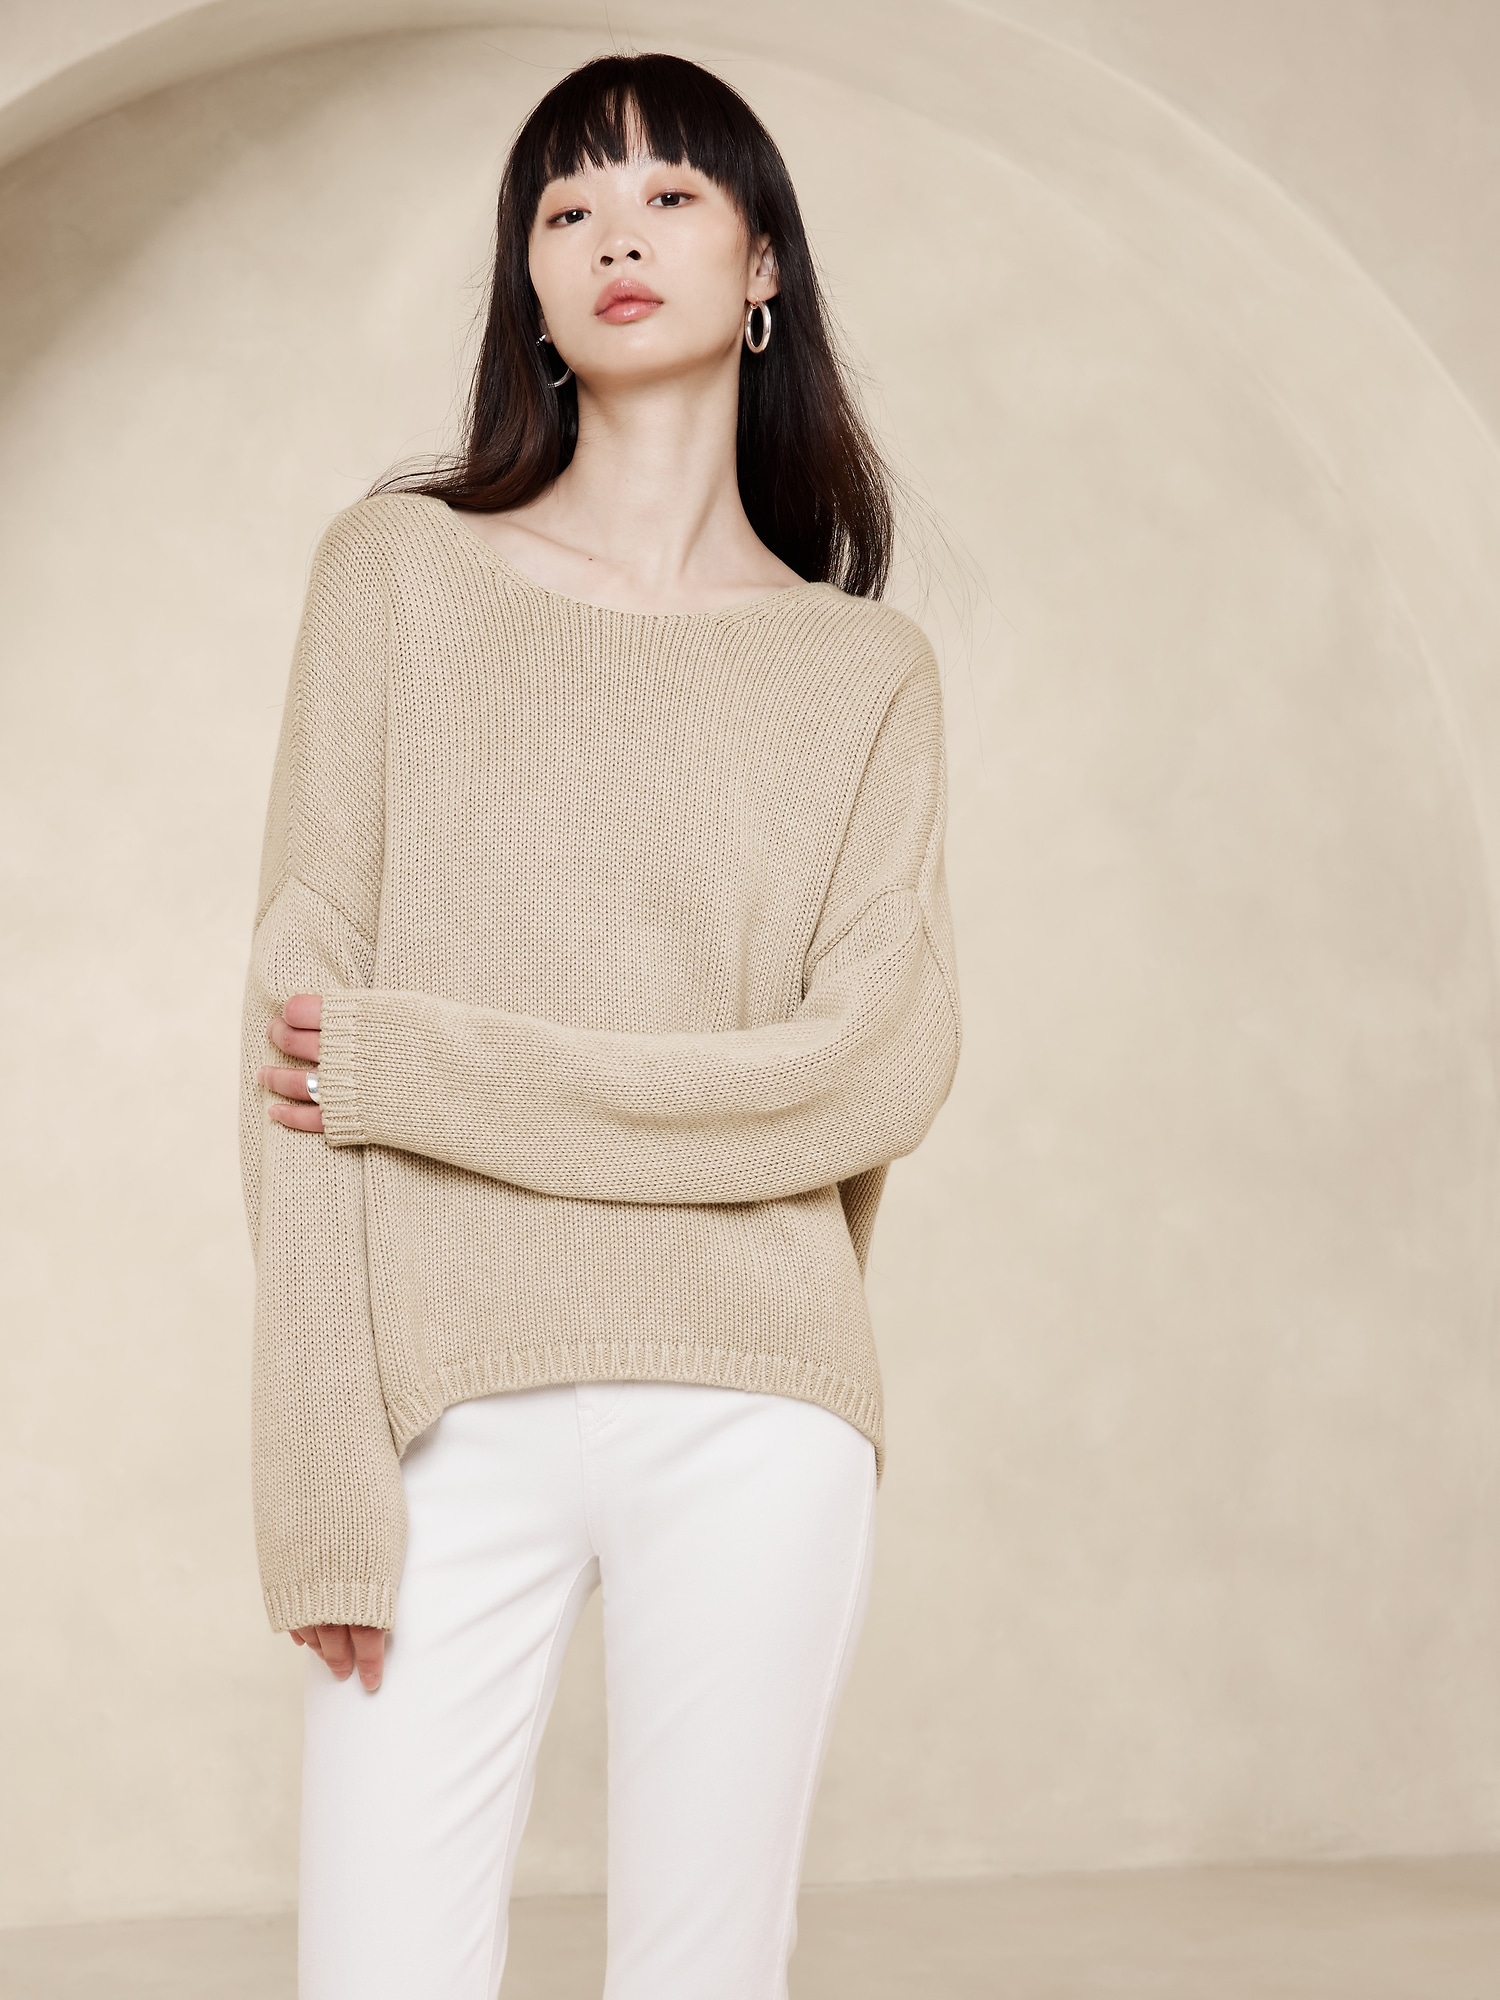 Seasonal Perfection Red Cropped Scoop Neck Sweater